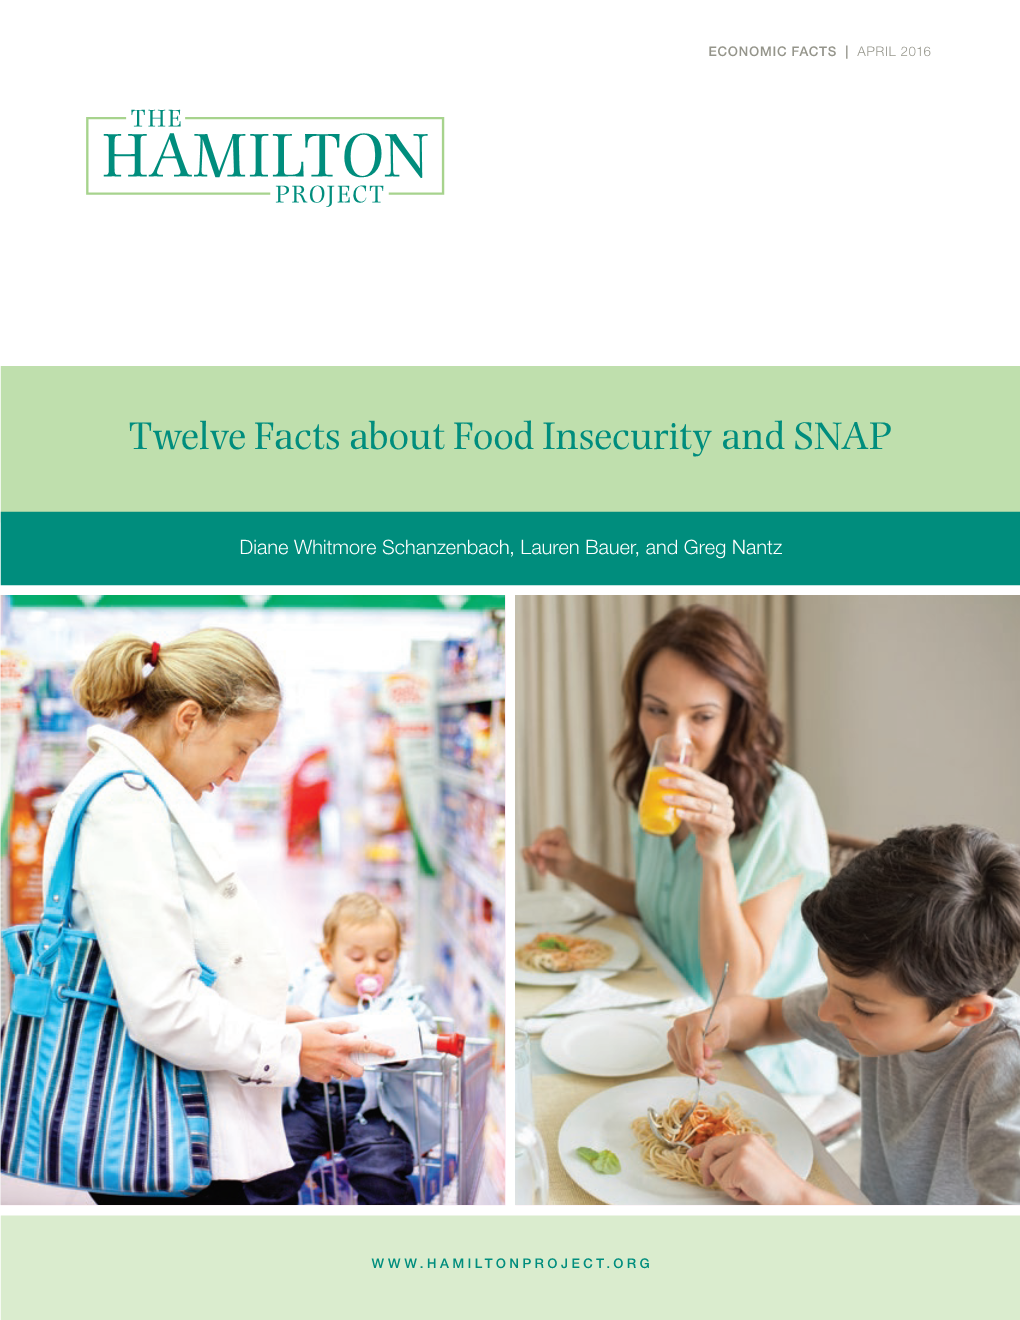 Twelve Facts About Food Insecurity and SNAP